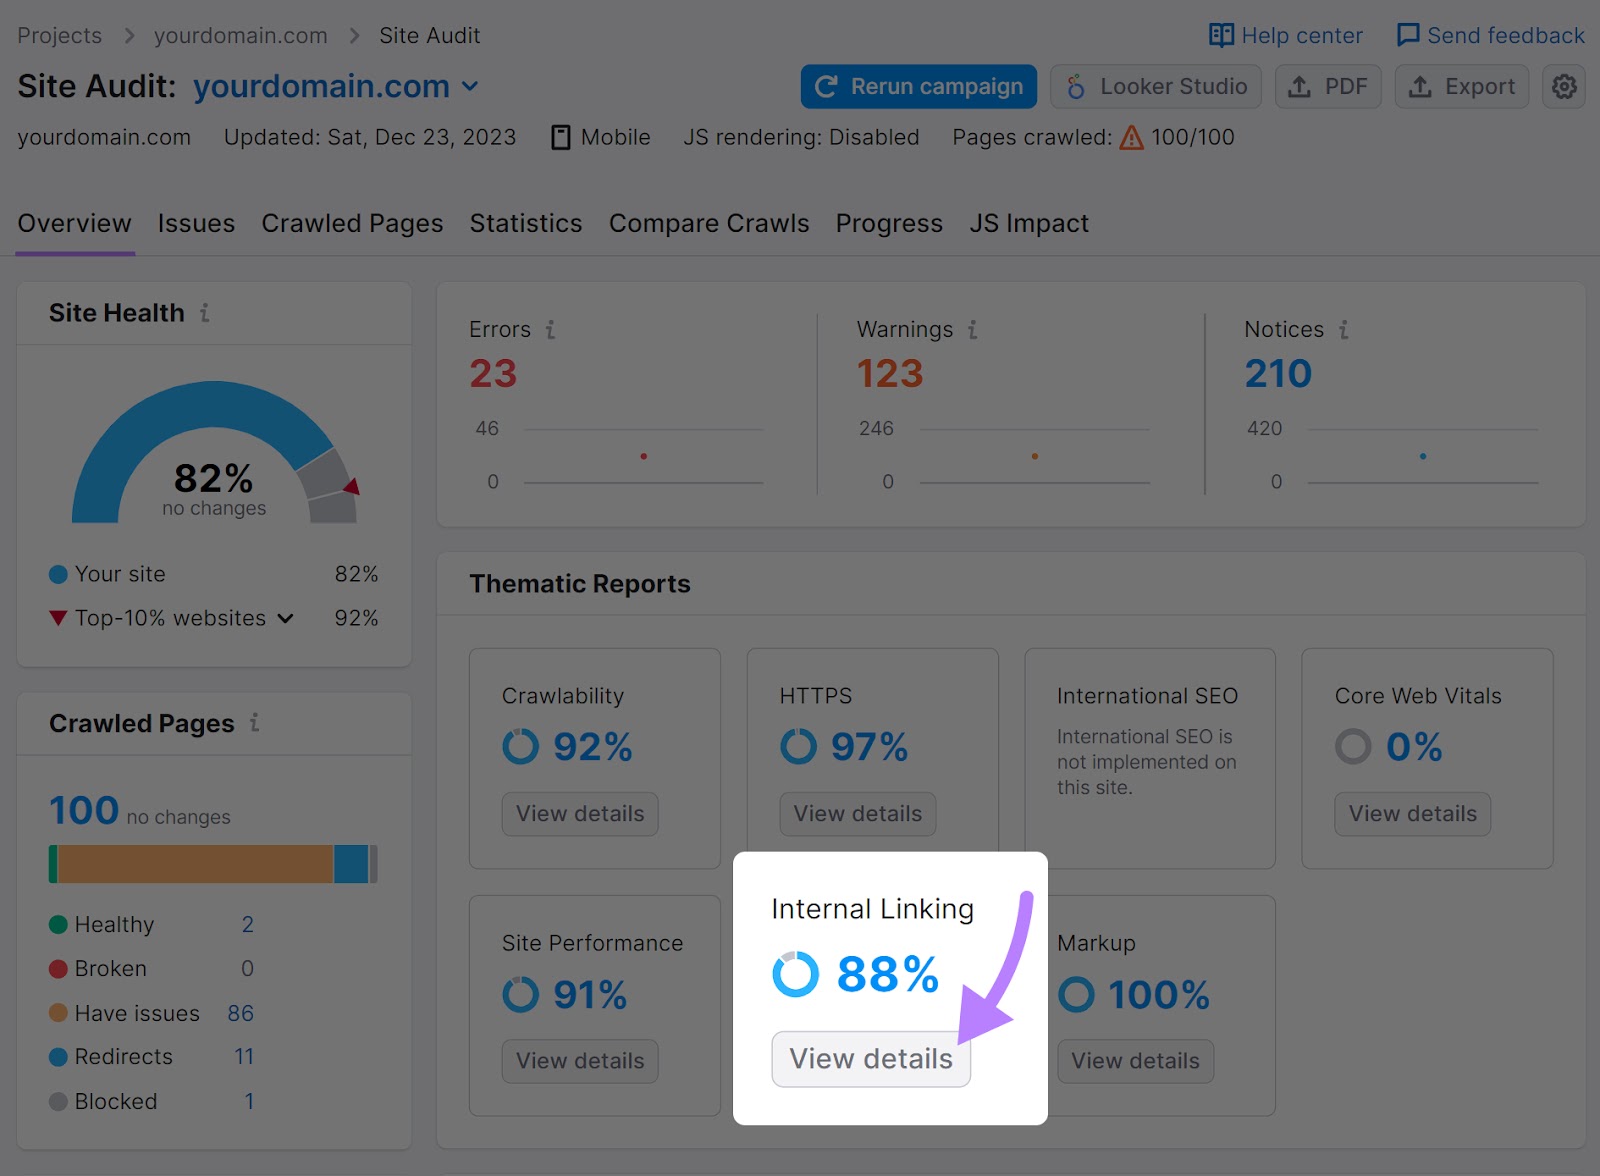 "Internal Linking" widget highlighted in the Site Audit's "Overview" dashboard